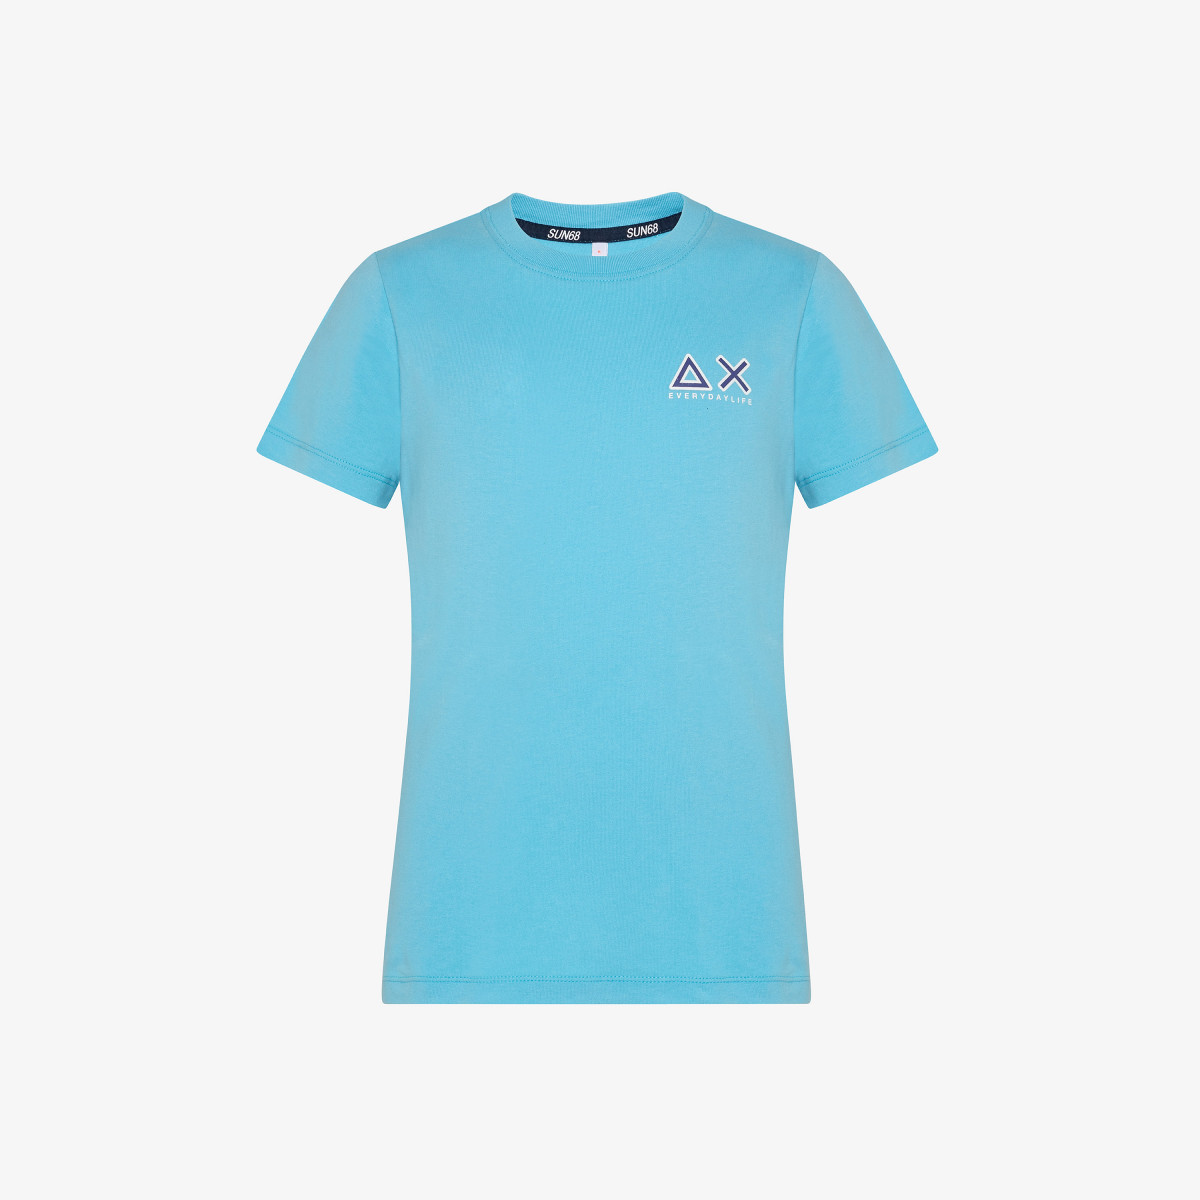 BOY'S ROUND T-SHIRT SMALL LOGO S/S TURQUOISE